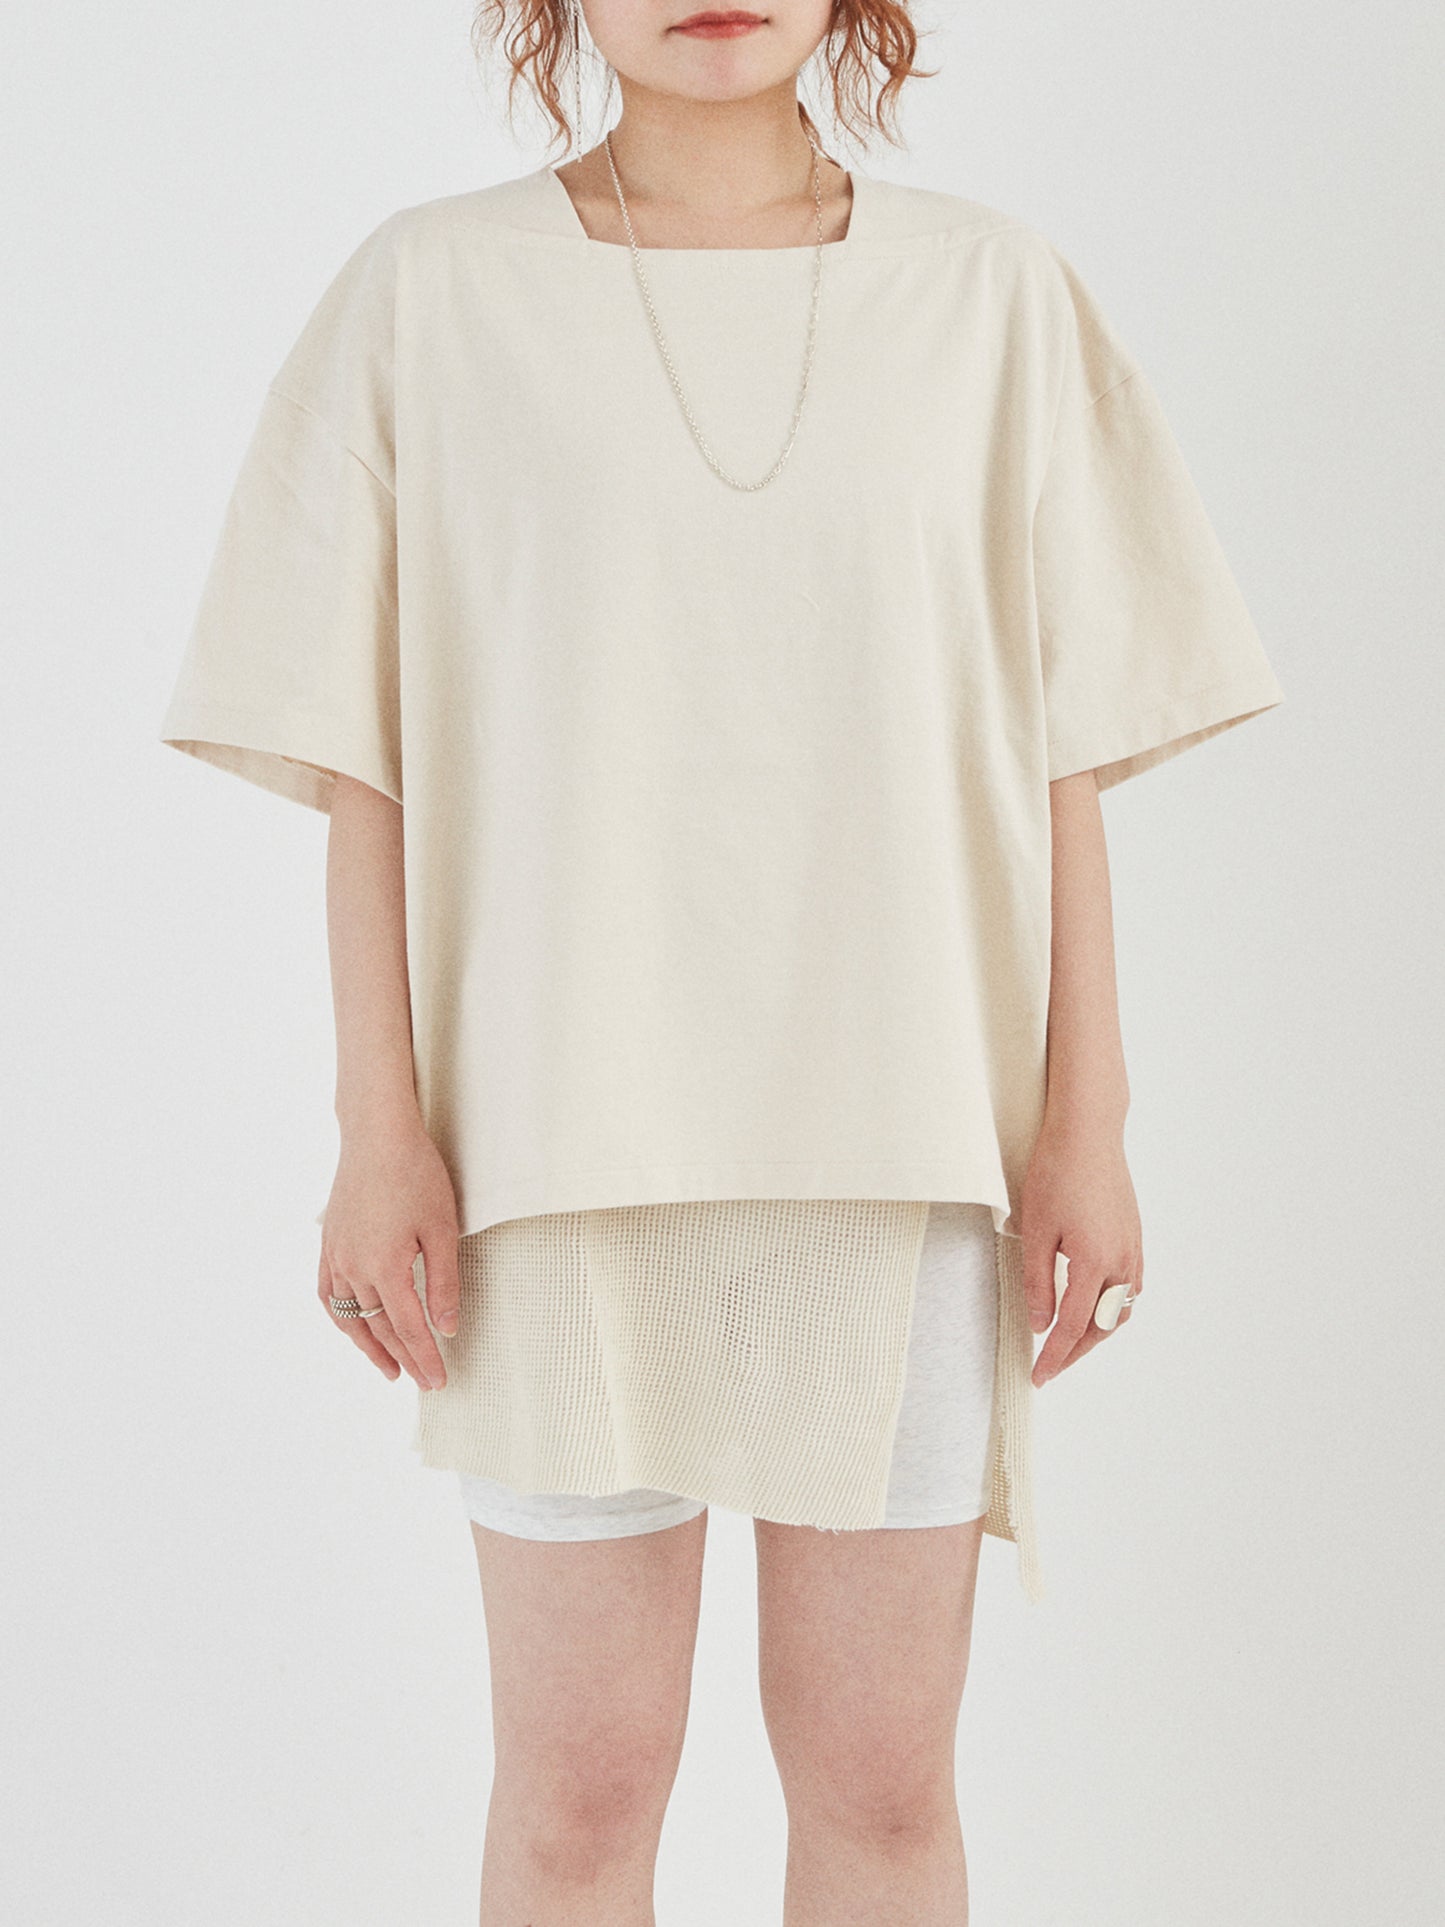 BAGGY BOAT S/S TEE COTTON JERSEY AM-C0206 Natural